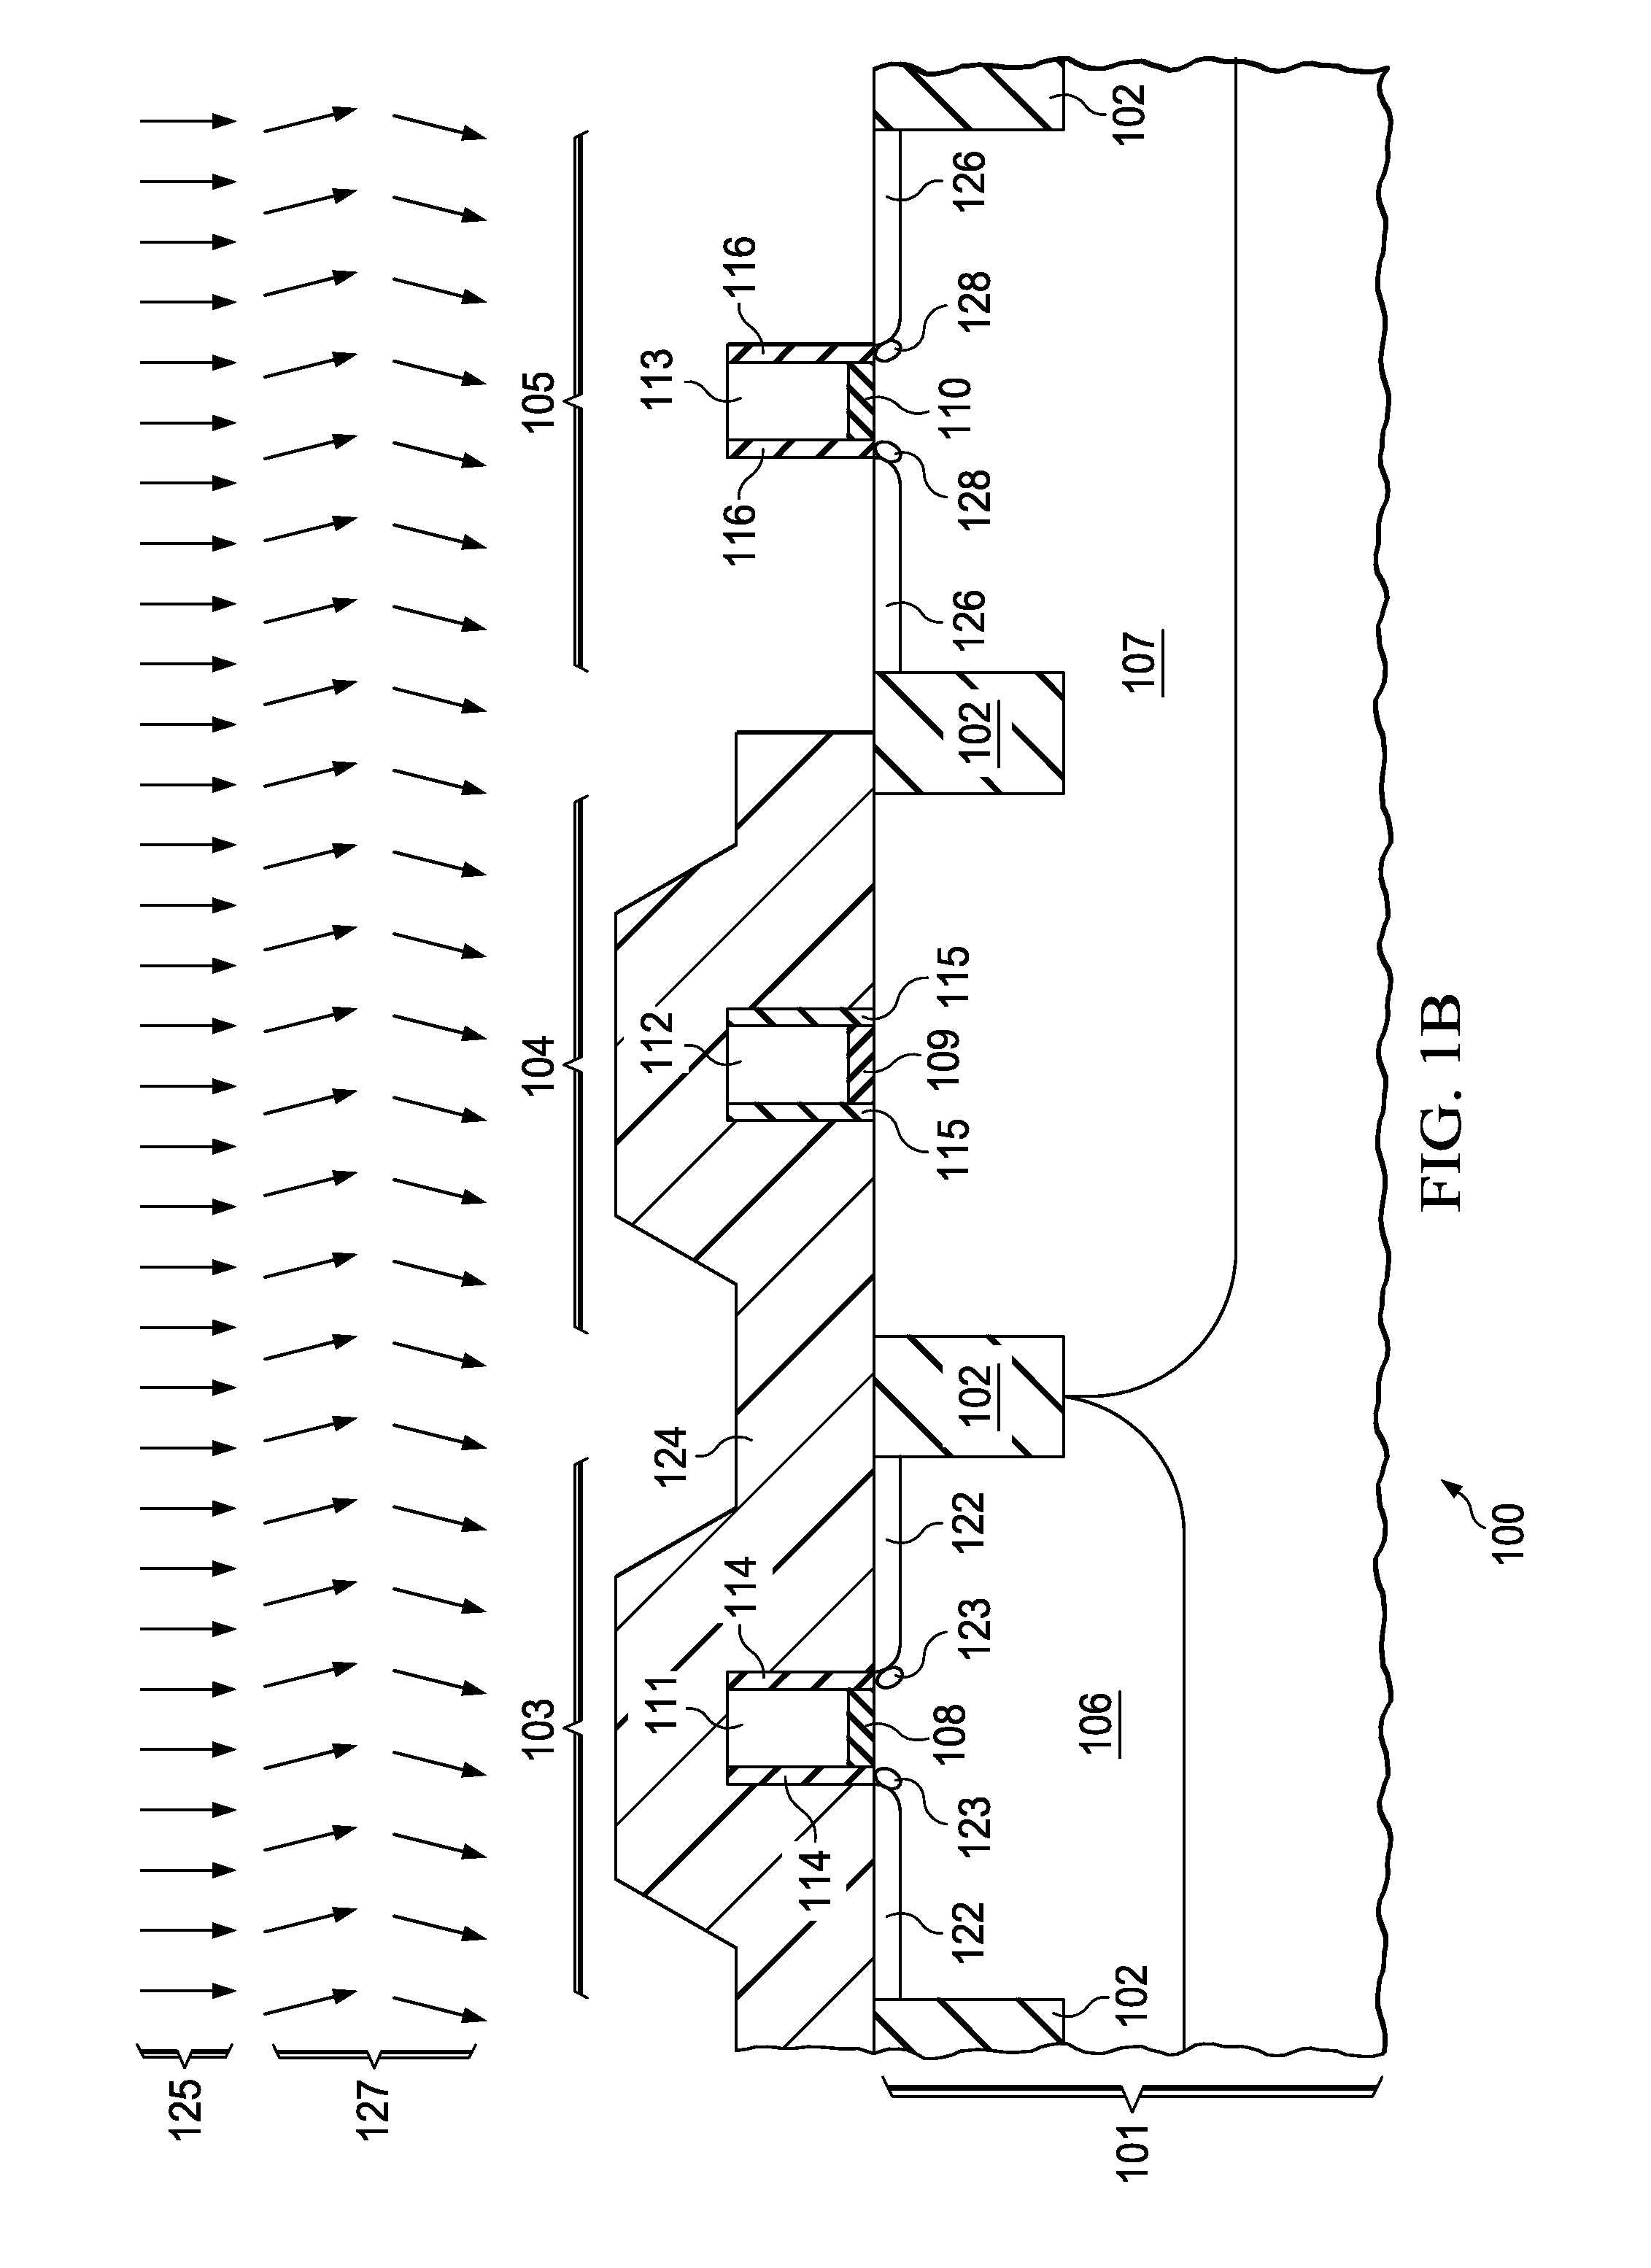 Two terminal quantum device using MOS capacitor structure